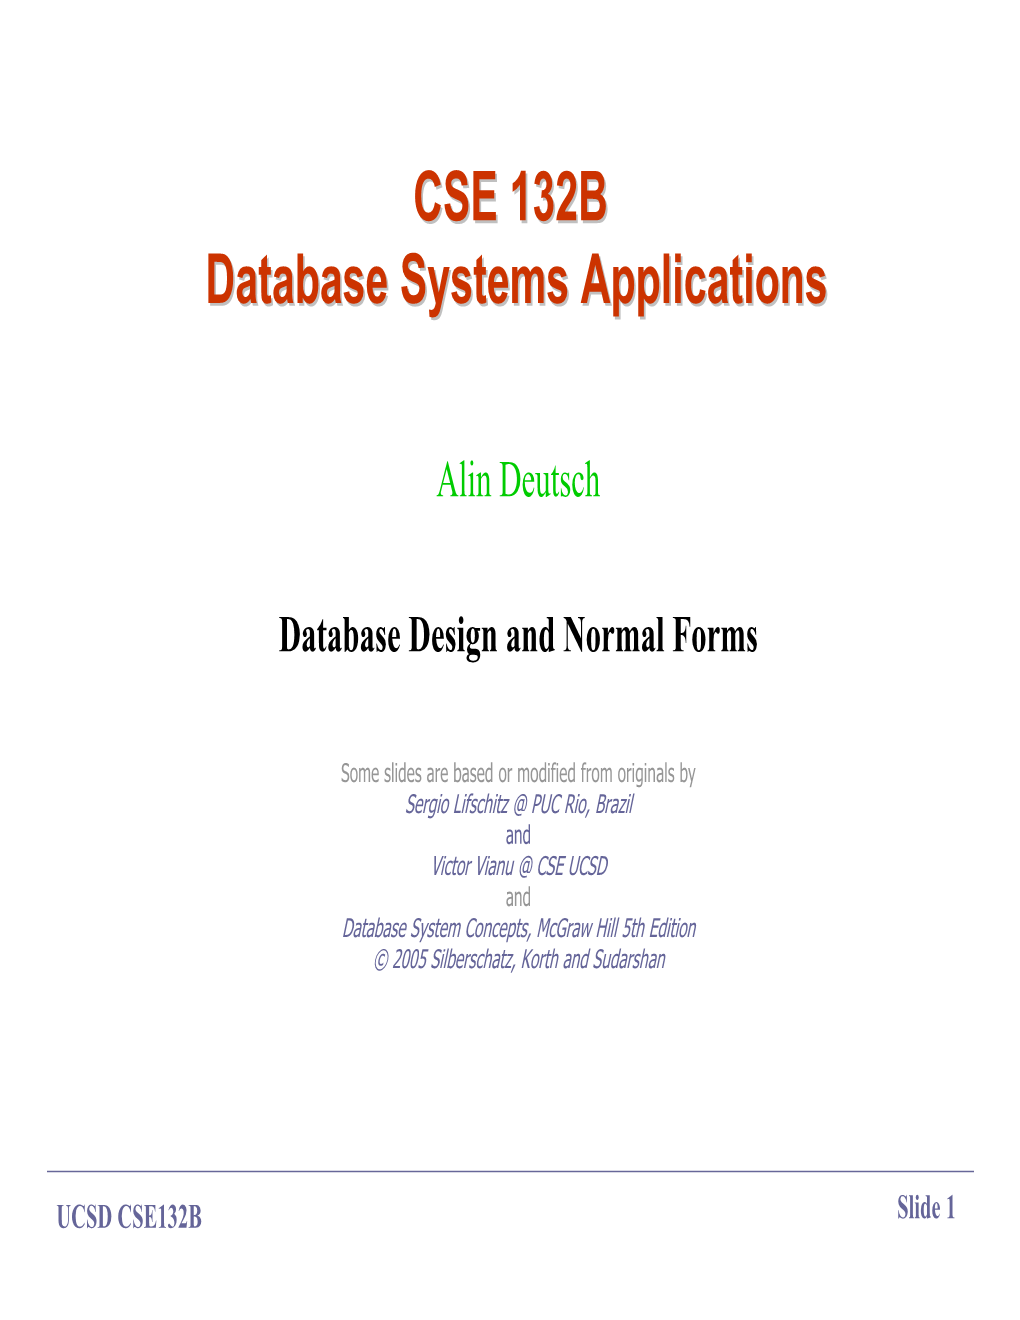 CSE 132B Database Systems Applications